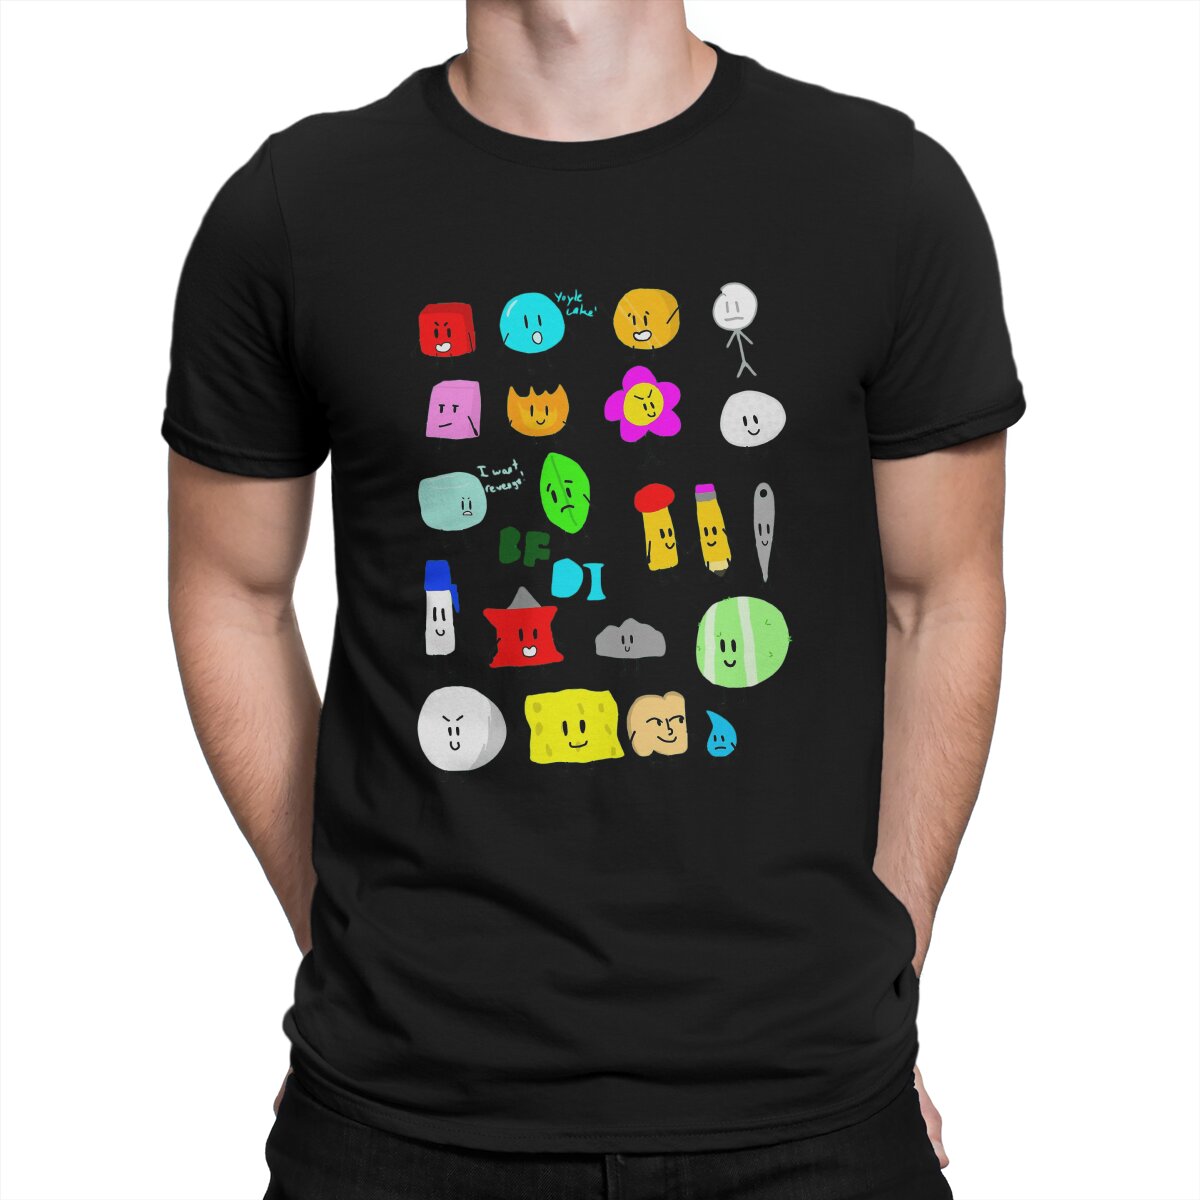 Characters Essential Men T Shirt Battle for Dream Island BFDI 4 and X Humor Tees Crewneck - BFDI Plush